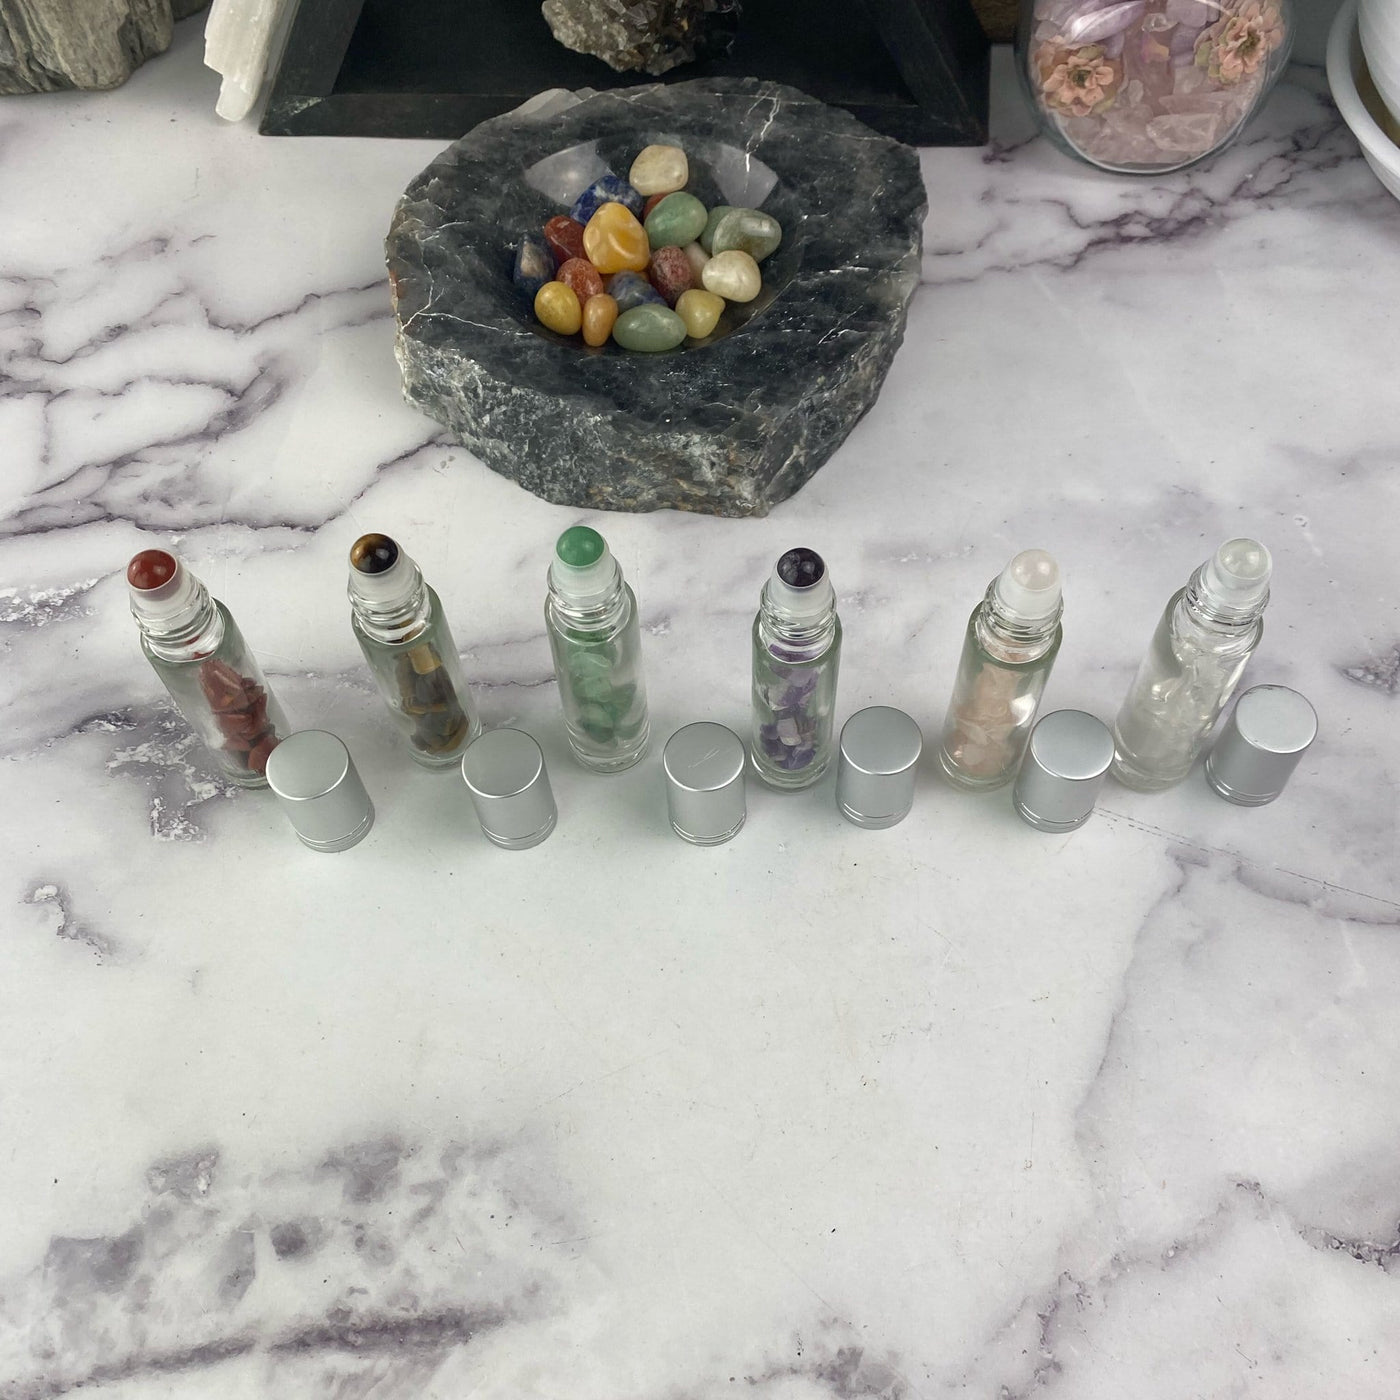 top view of the bottles to show the crystal roller ball 